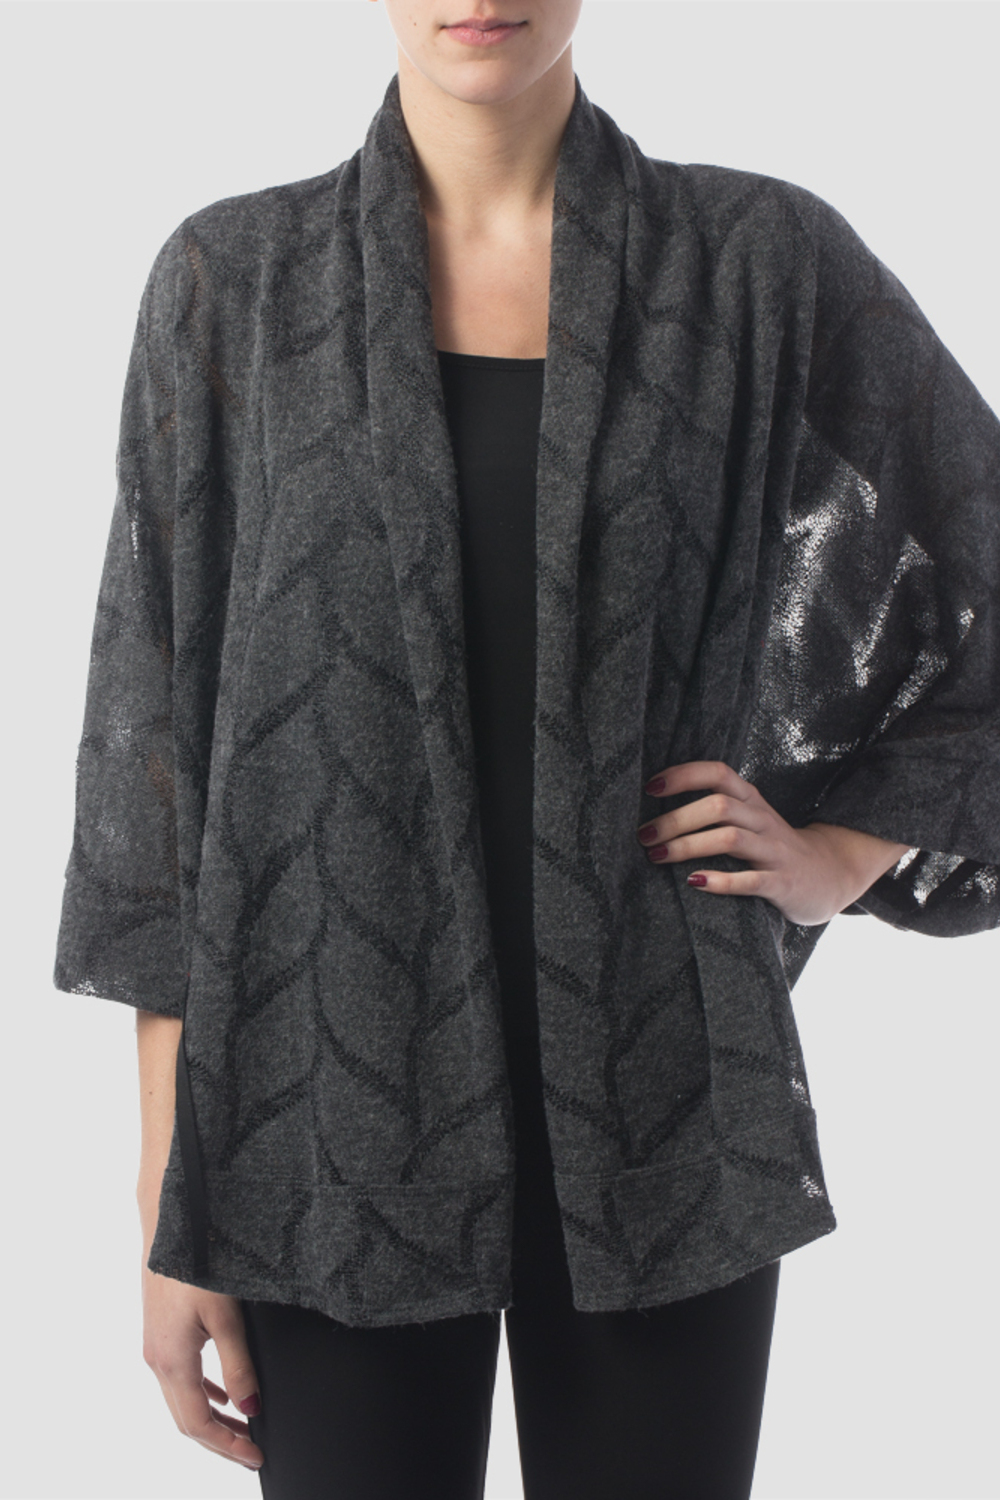 Joseph Ribkoff cover up style 153384. Charcoal